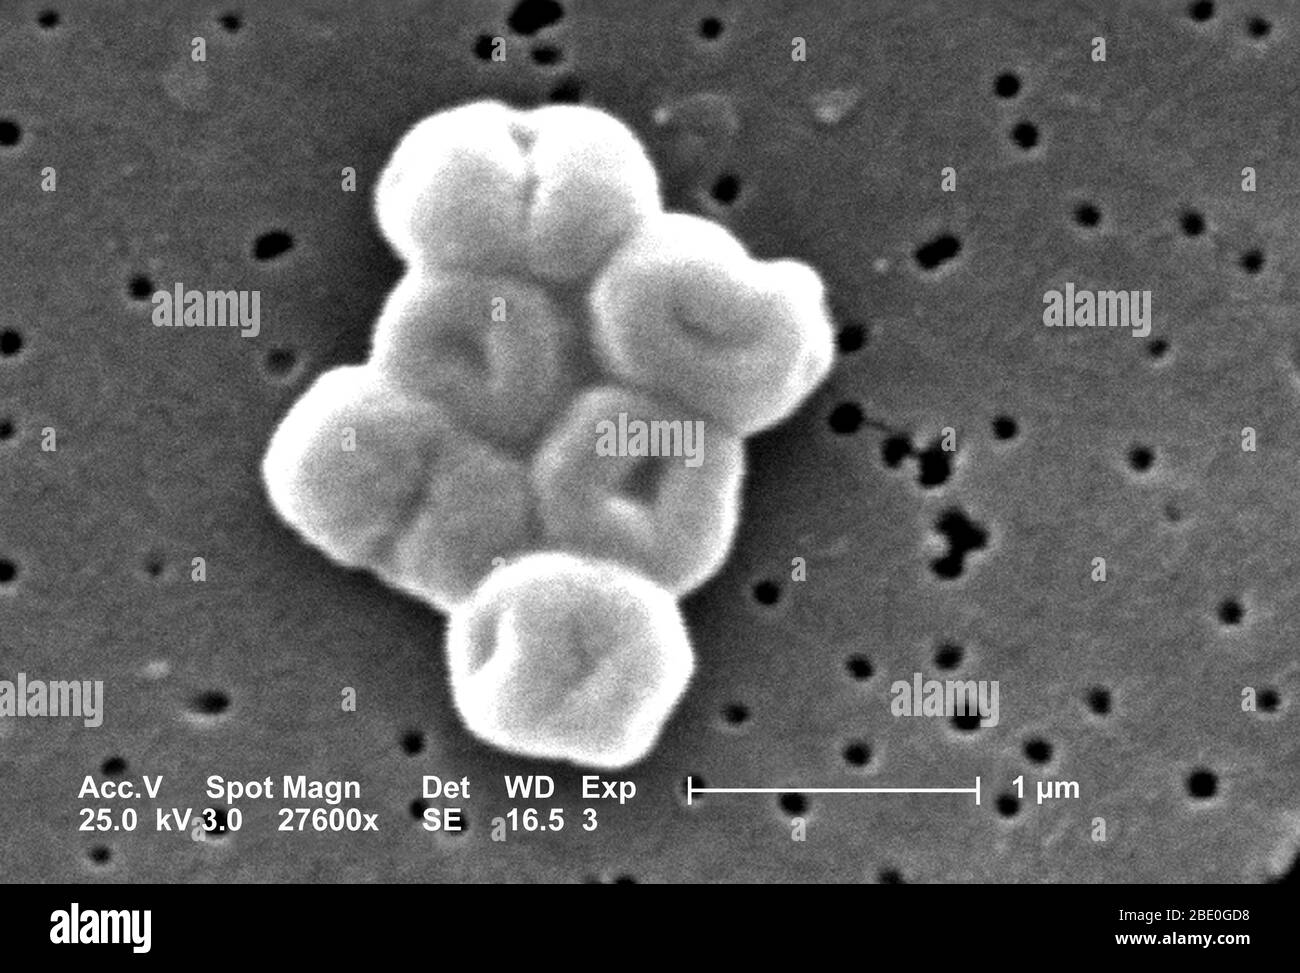 This SEM depicts a highly magnified cluster of Gram-negative, non-motile Acinetobacter baumannii bacteria; Mag - 27600x. Members of the genus Acinetobacter are nonmotile rods, 1-1.5µm in diameter, and 1.5-2.5µm in length, becoming spherical in shape while in their stationary phase of growth. Acinetobacter spp. are widely distributed in nature, and are normal flora on the skin. Some members of the genus are important because they are an emerging cause of hospital acquired pulmonary, i.e., pneumoniae, hemopathic, and wound infections. Stock Photo